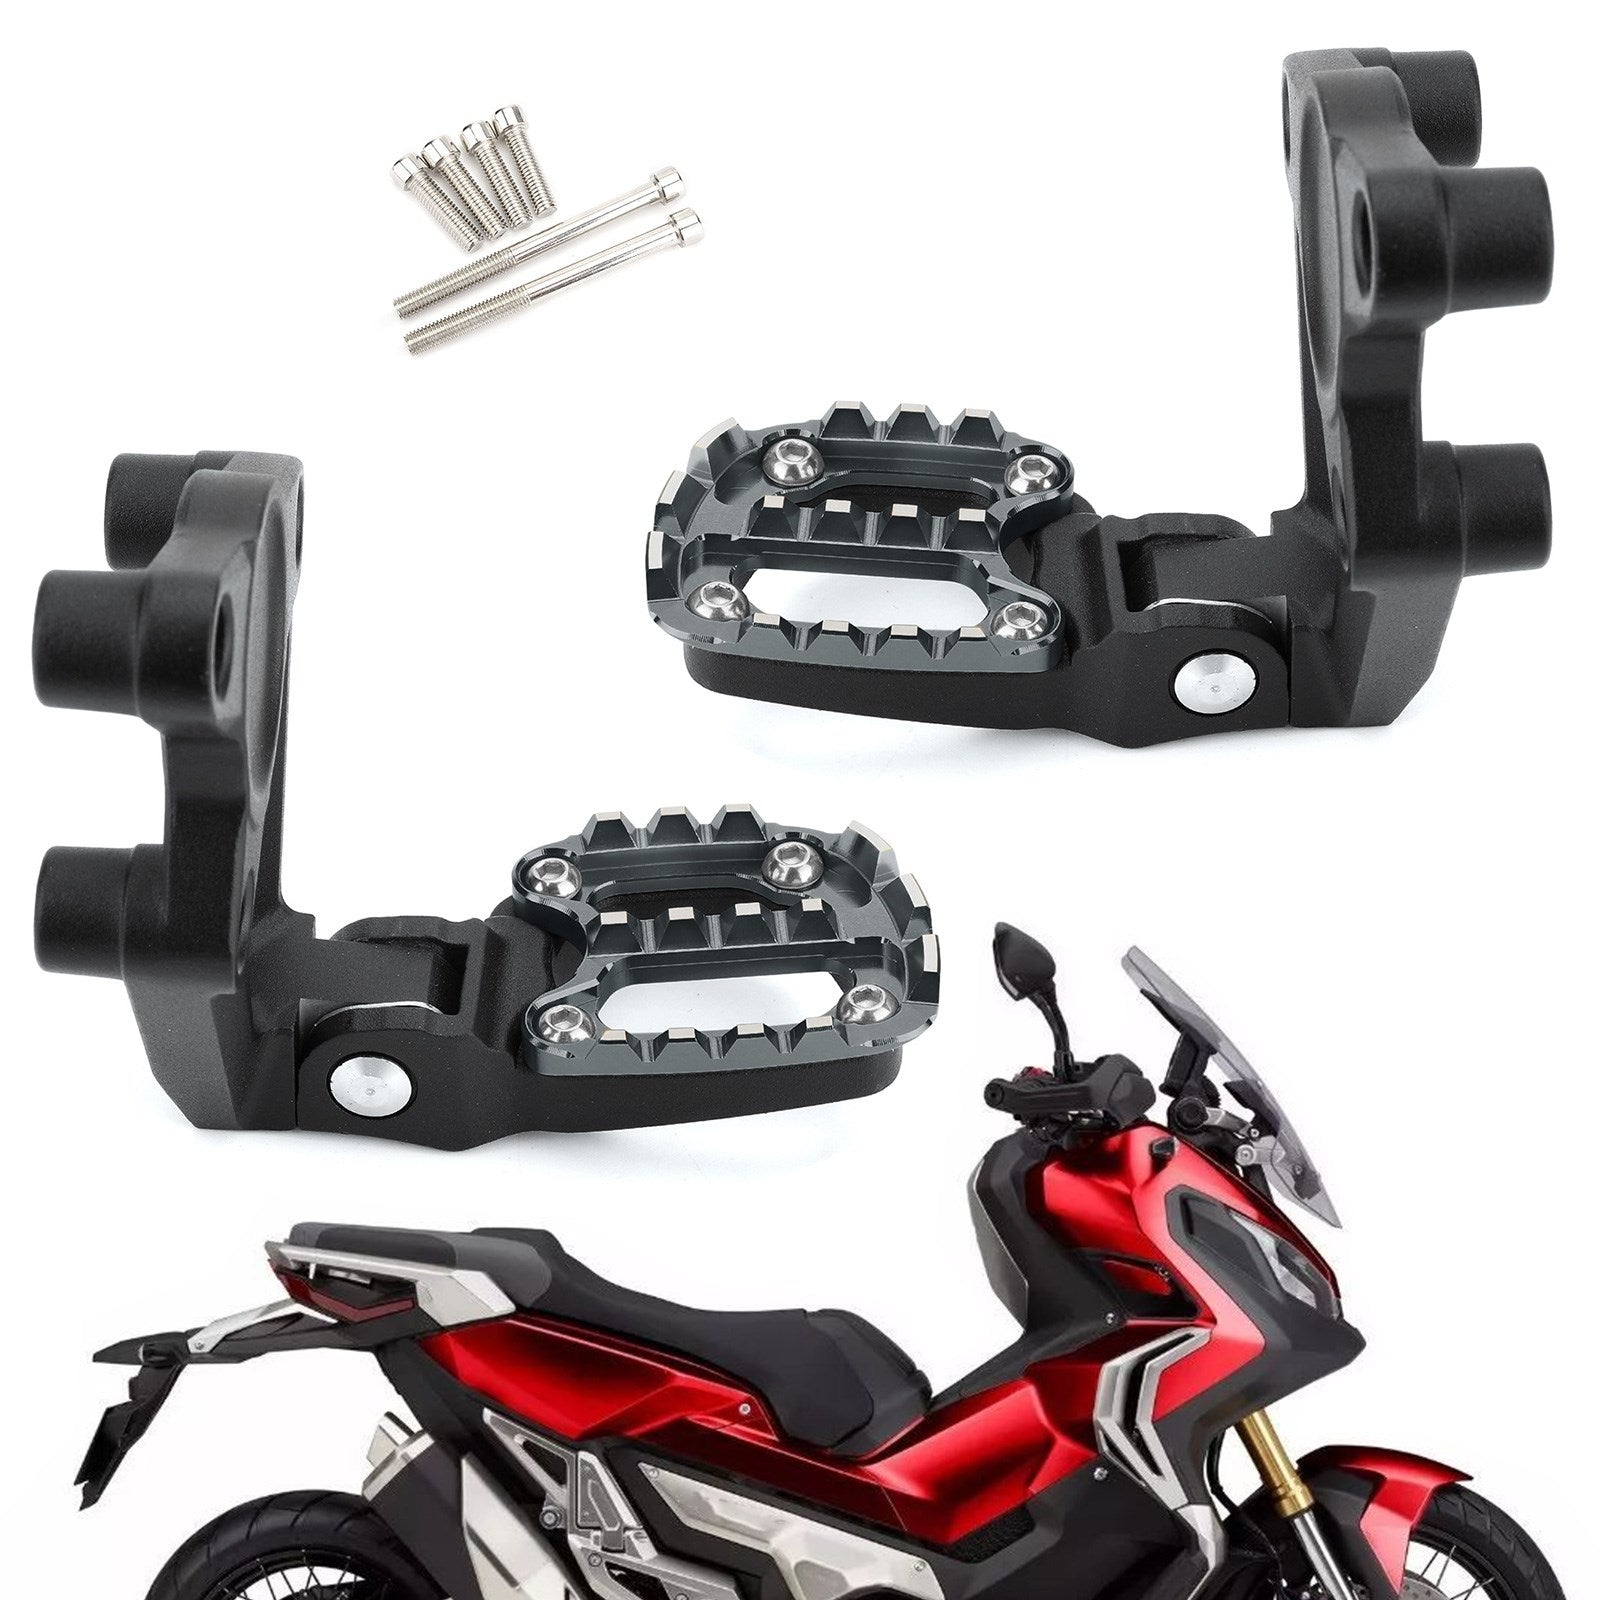 Moto Folding Footrests Foot Pegs Rear Pedals For Honda X-ADV 750 2017-2018 TIVehicle Parts &amp; Accessories, Motorcycle Parts, Other Motorcycle Parts!